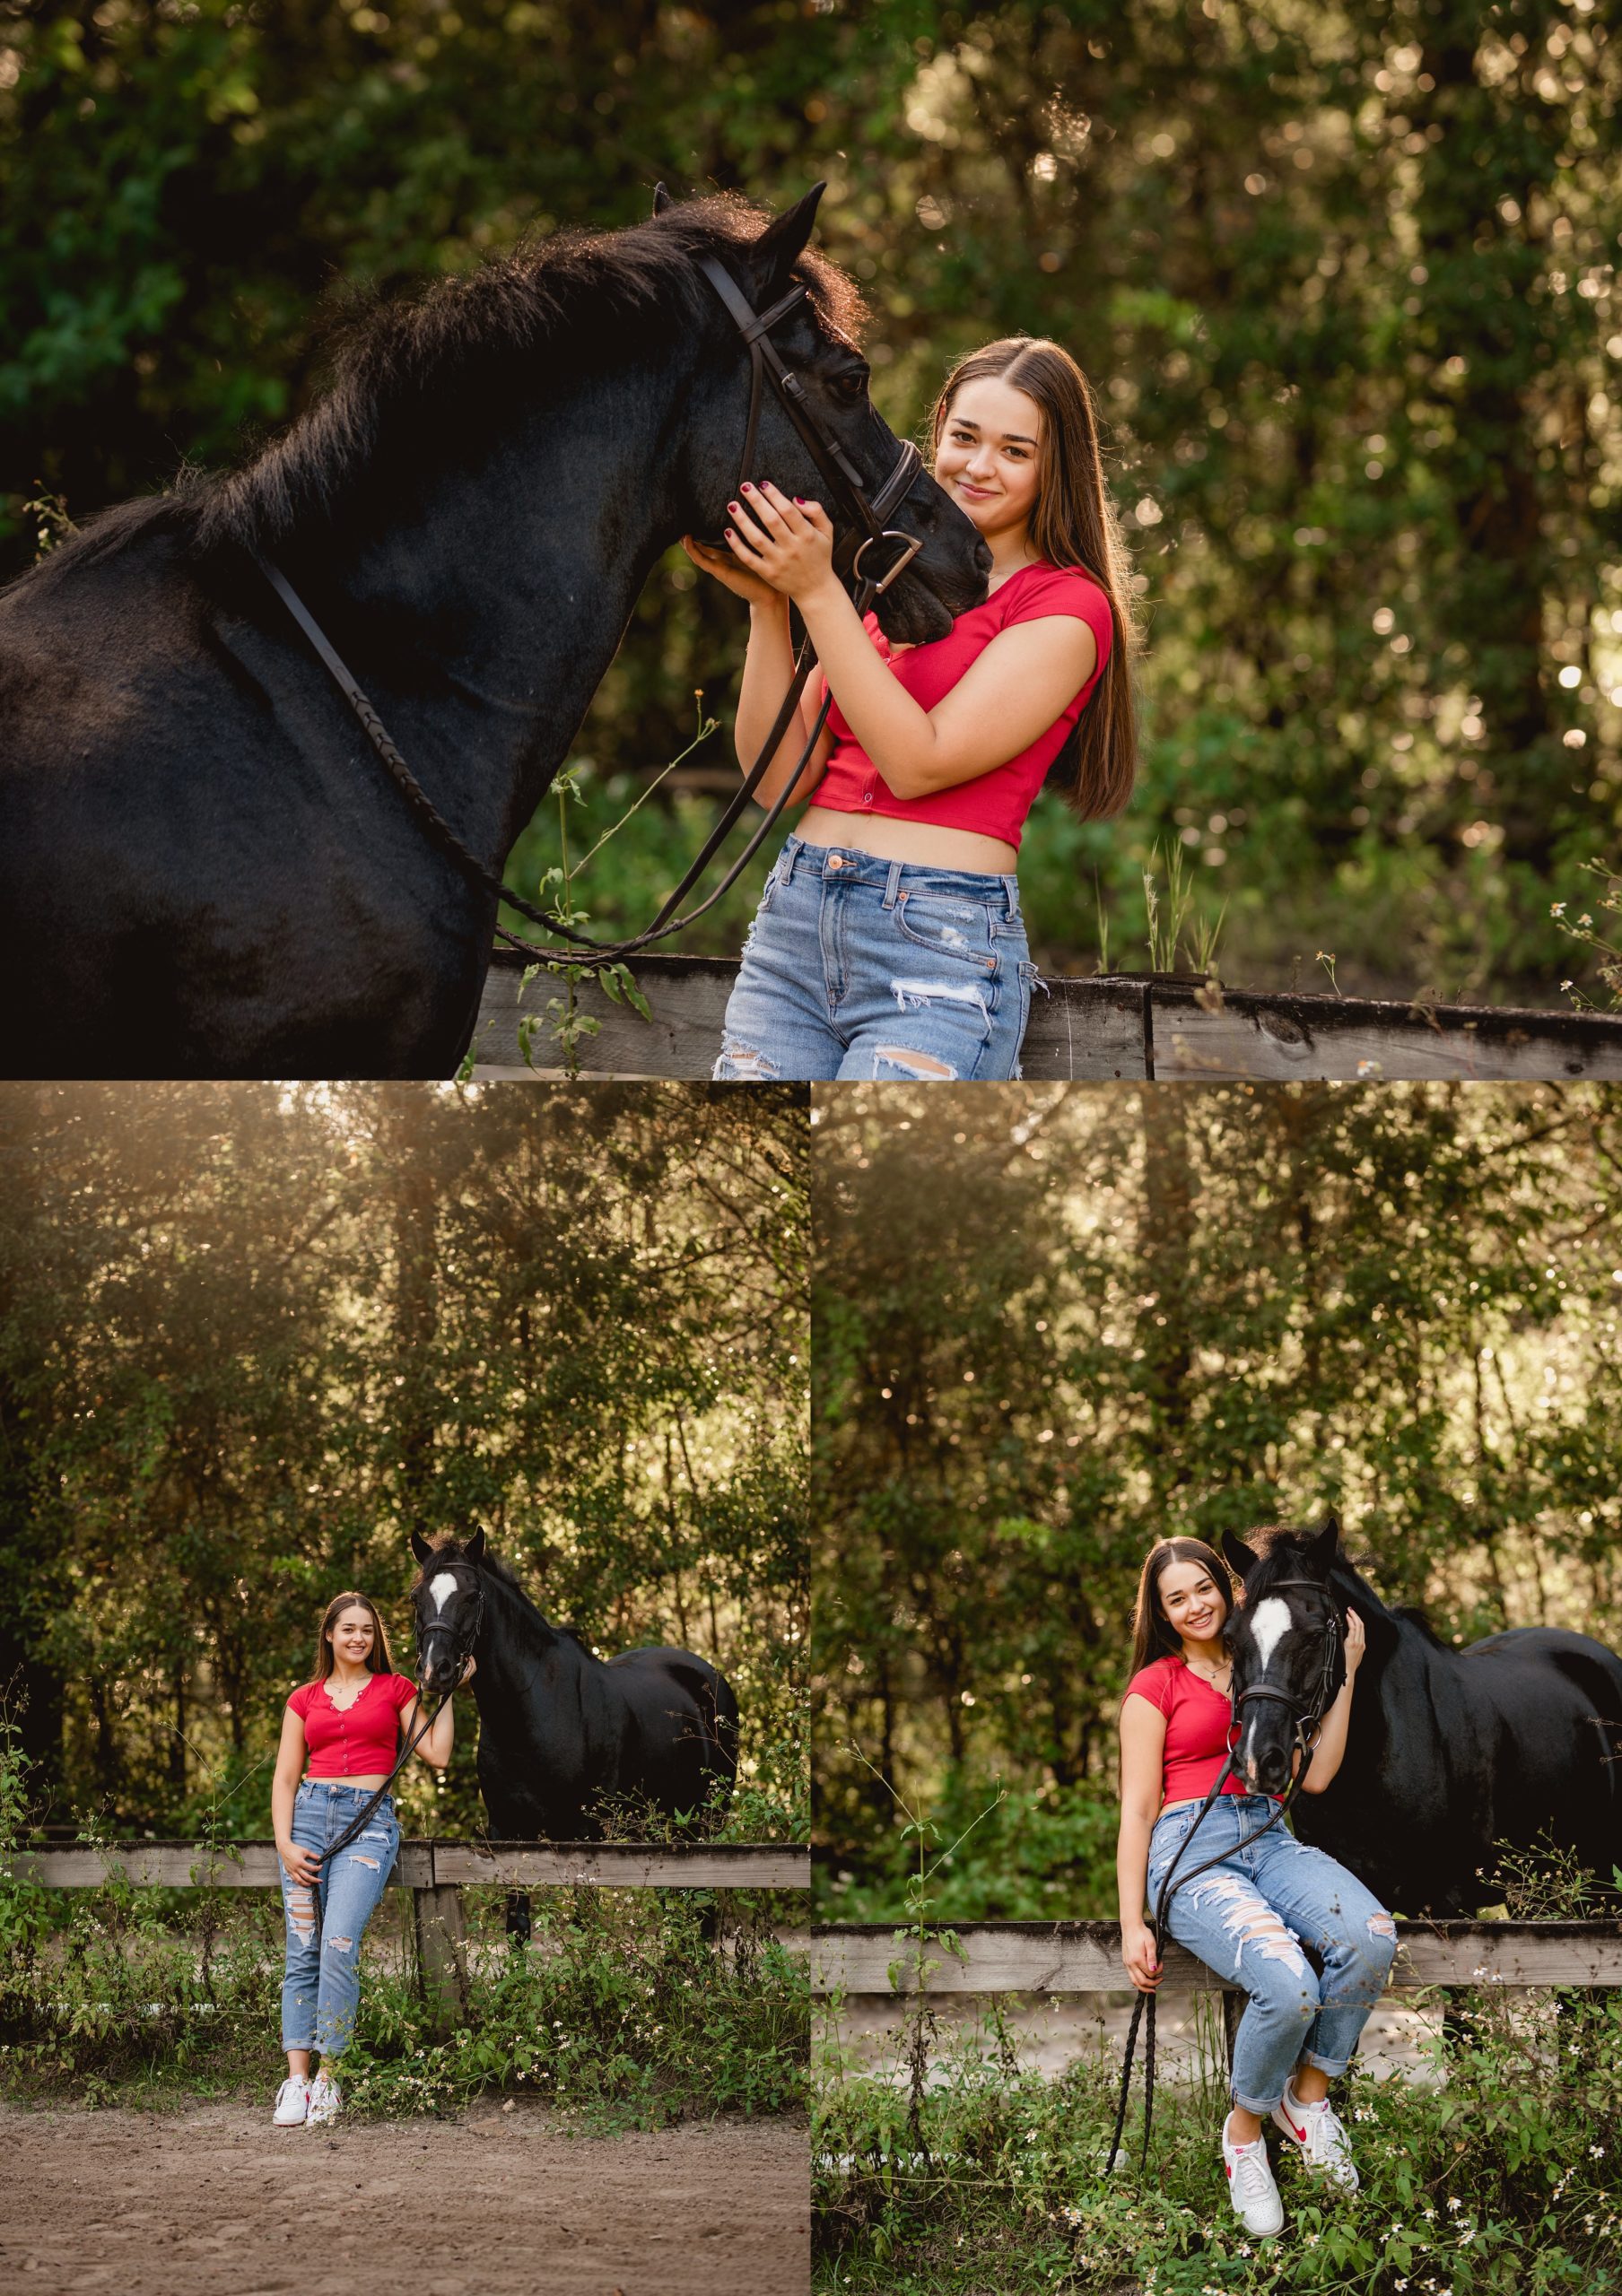 Horse and rider session during the golden hour with black pony and girl.